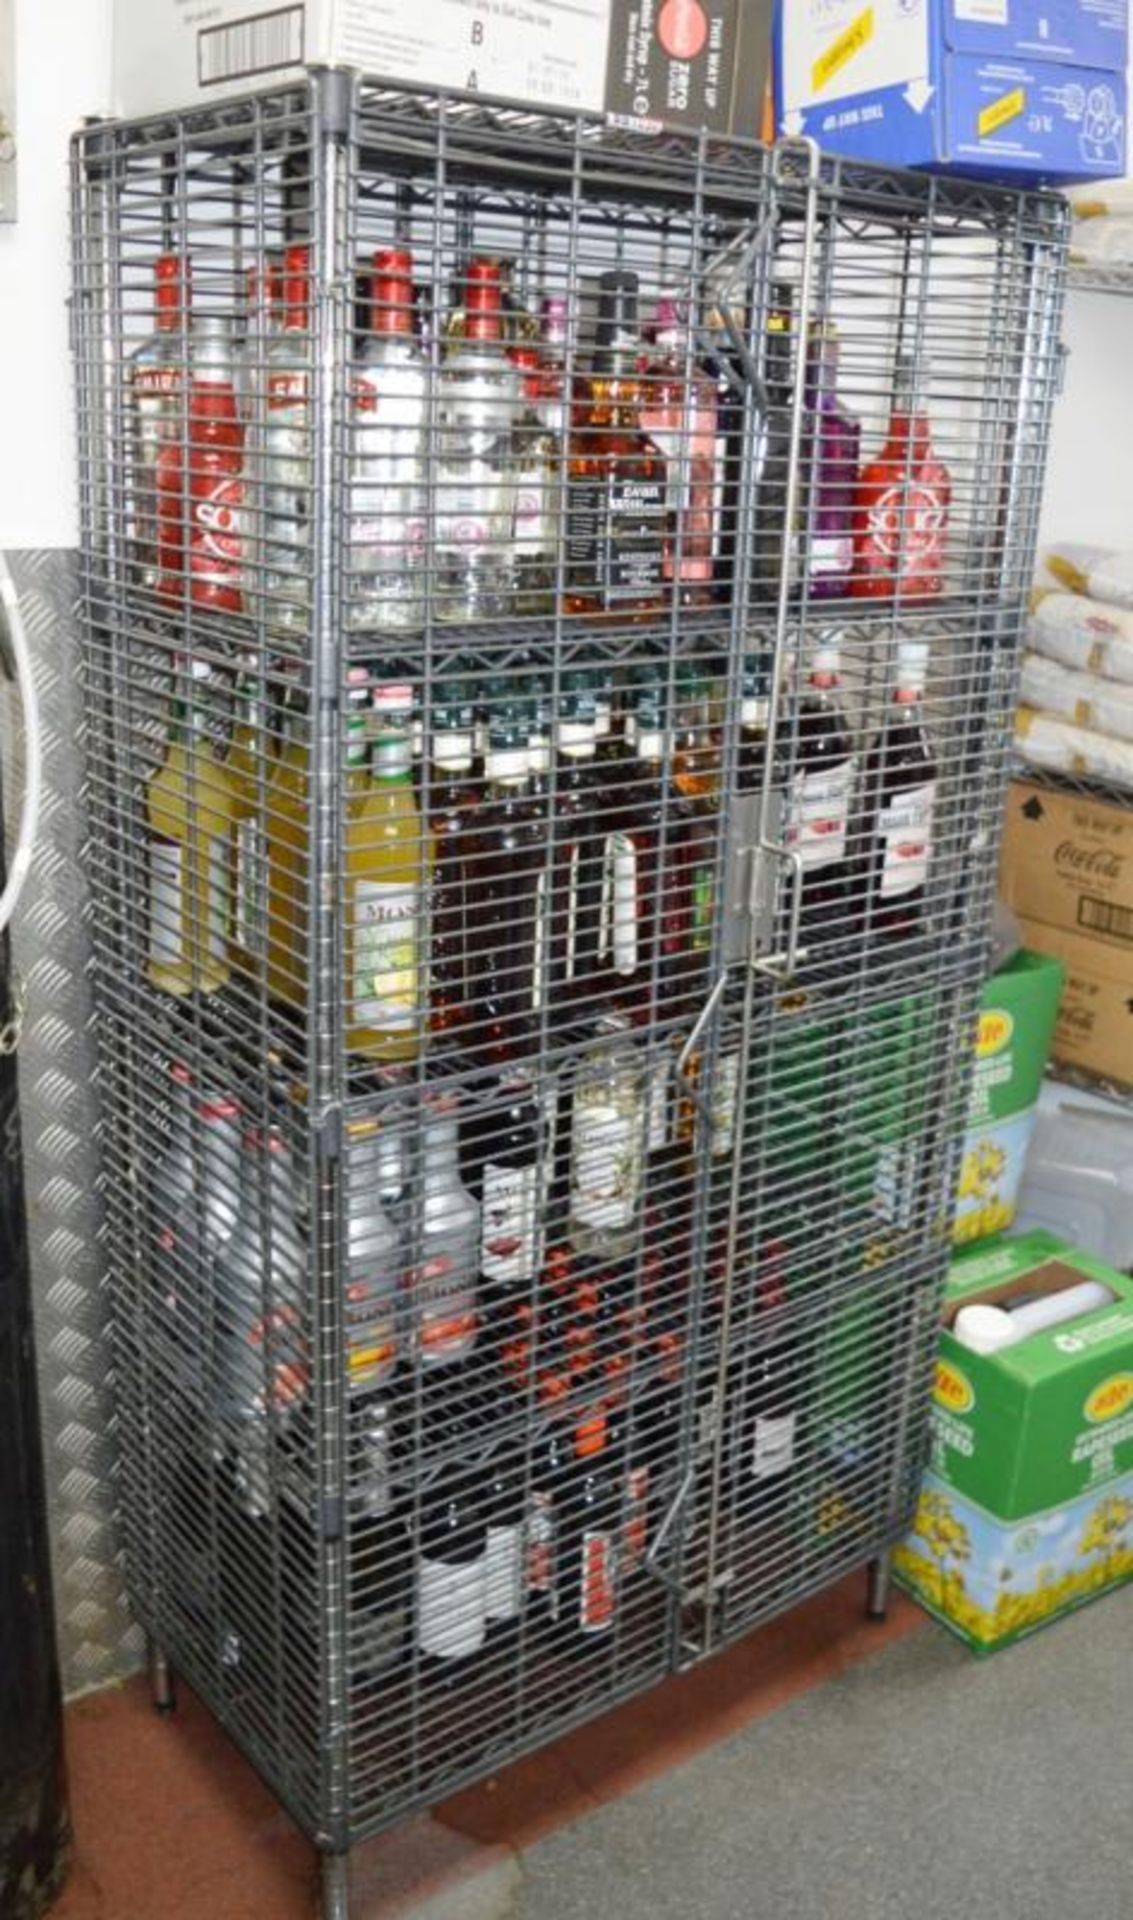 1 x Wines / Spirits Lockable Security Cage - H160 x W80 x D40 cms - CL357 - Location: Bolton BL1